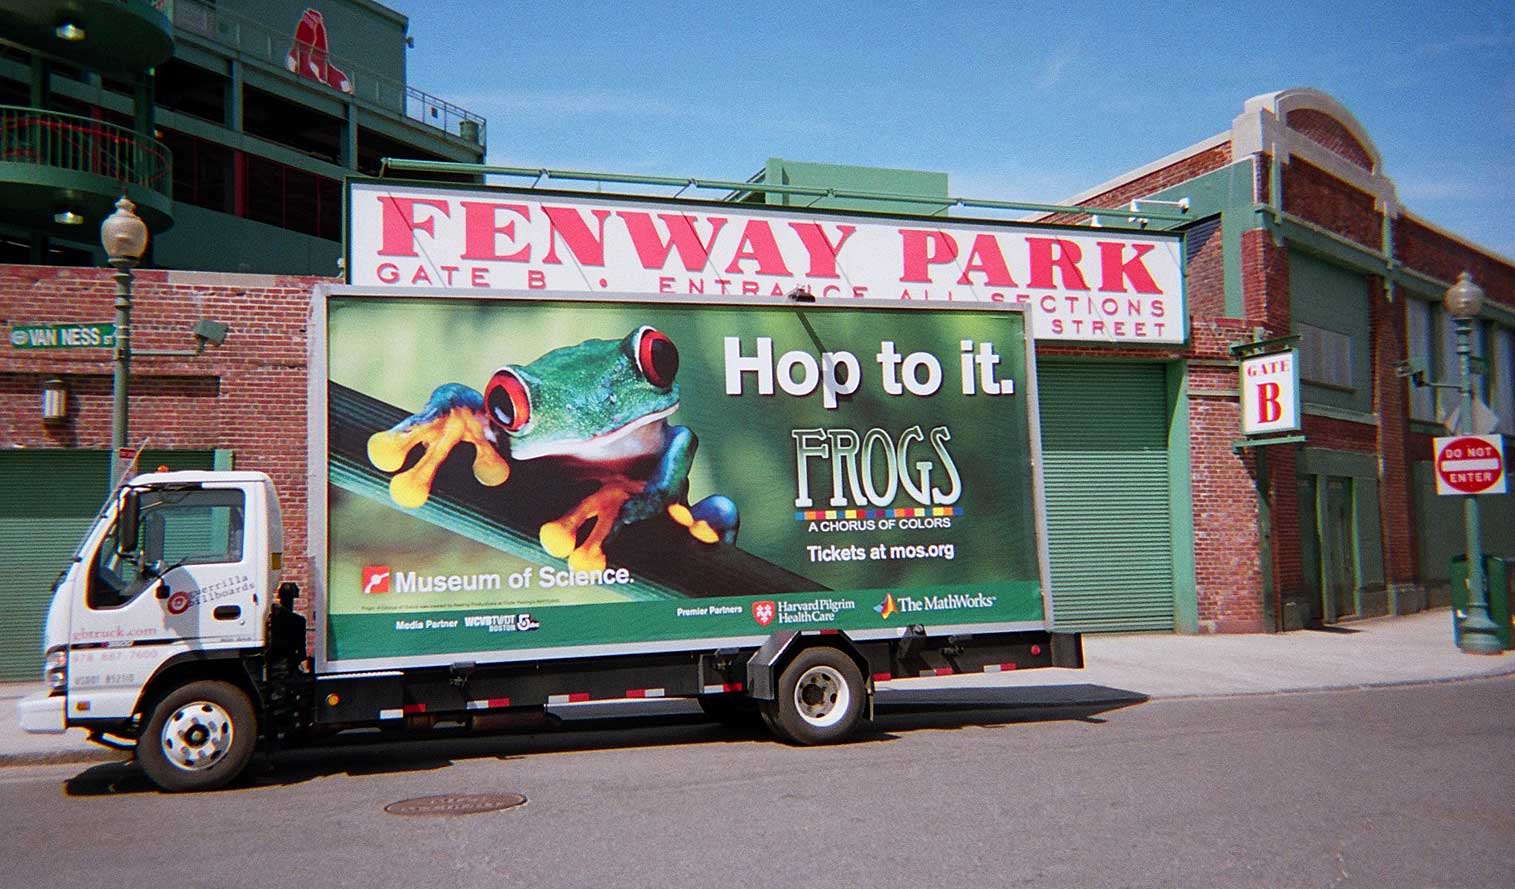 Mobile billboard truck promoting the Museum of Science in Boston.